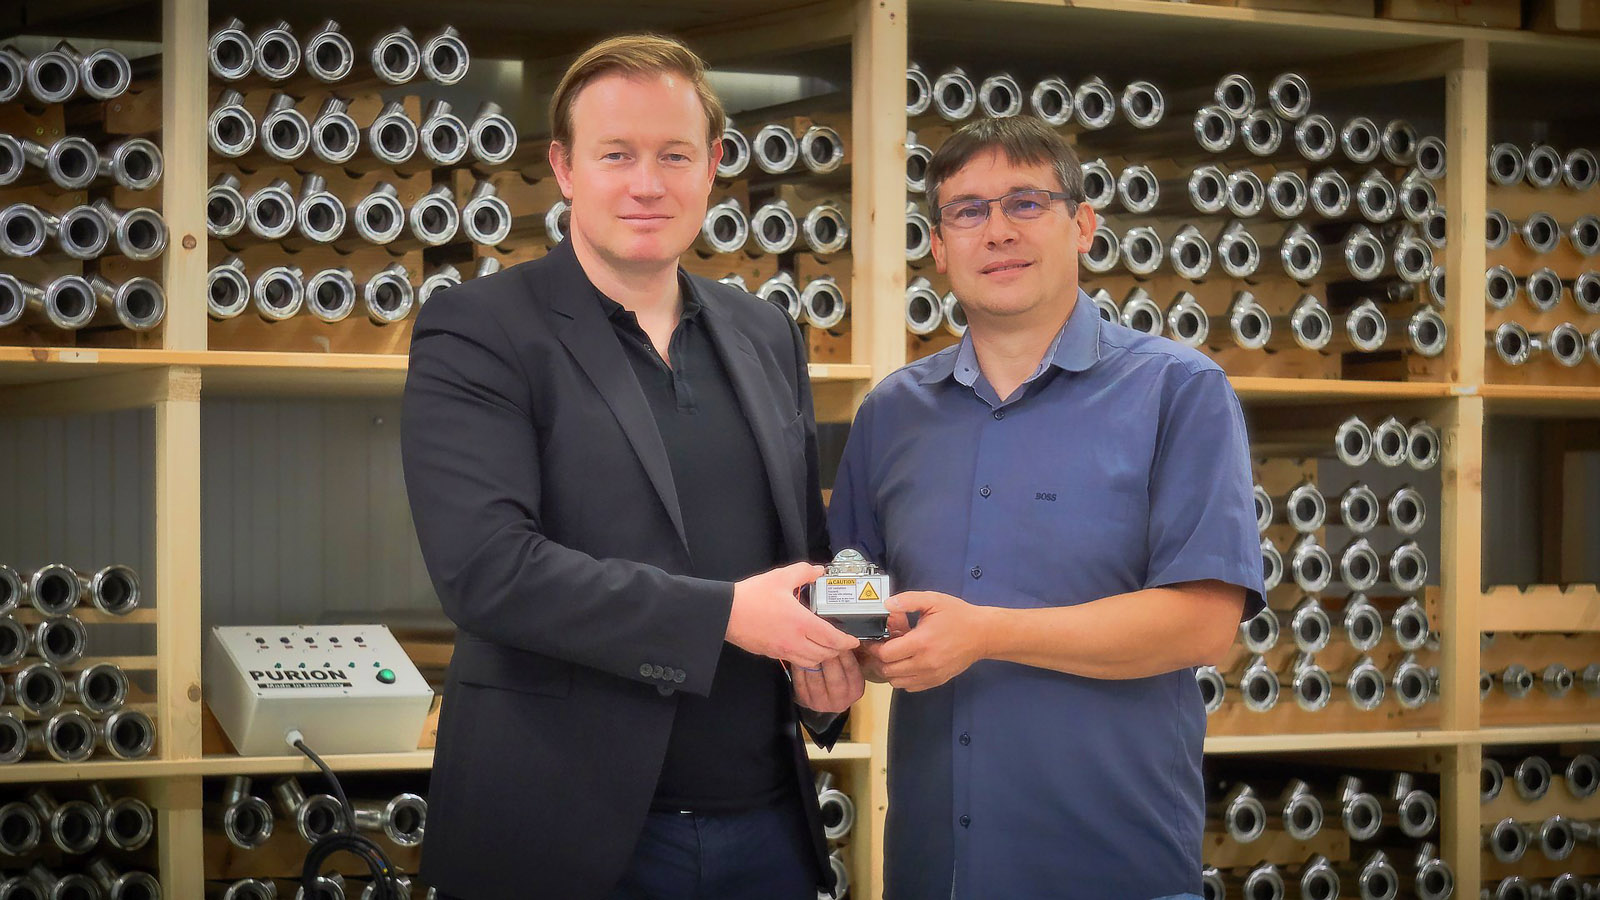 PURION managing director Mark Wipprich (left) and Fraunhofer researcher Thomas Westerhoff (right) with a UV-C LED module.